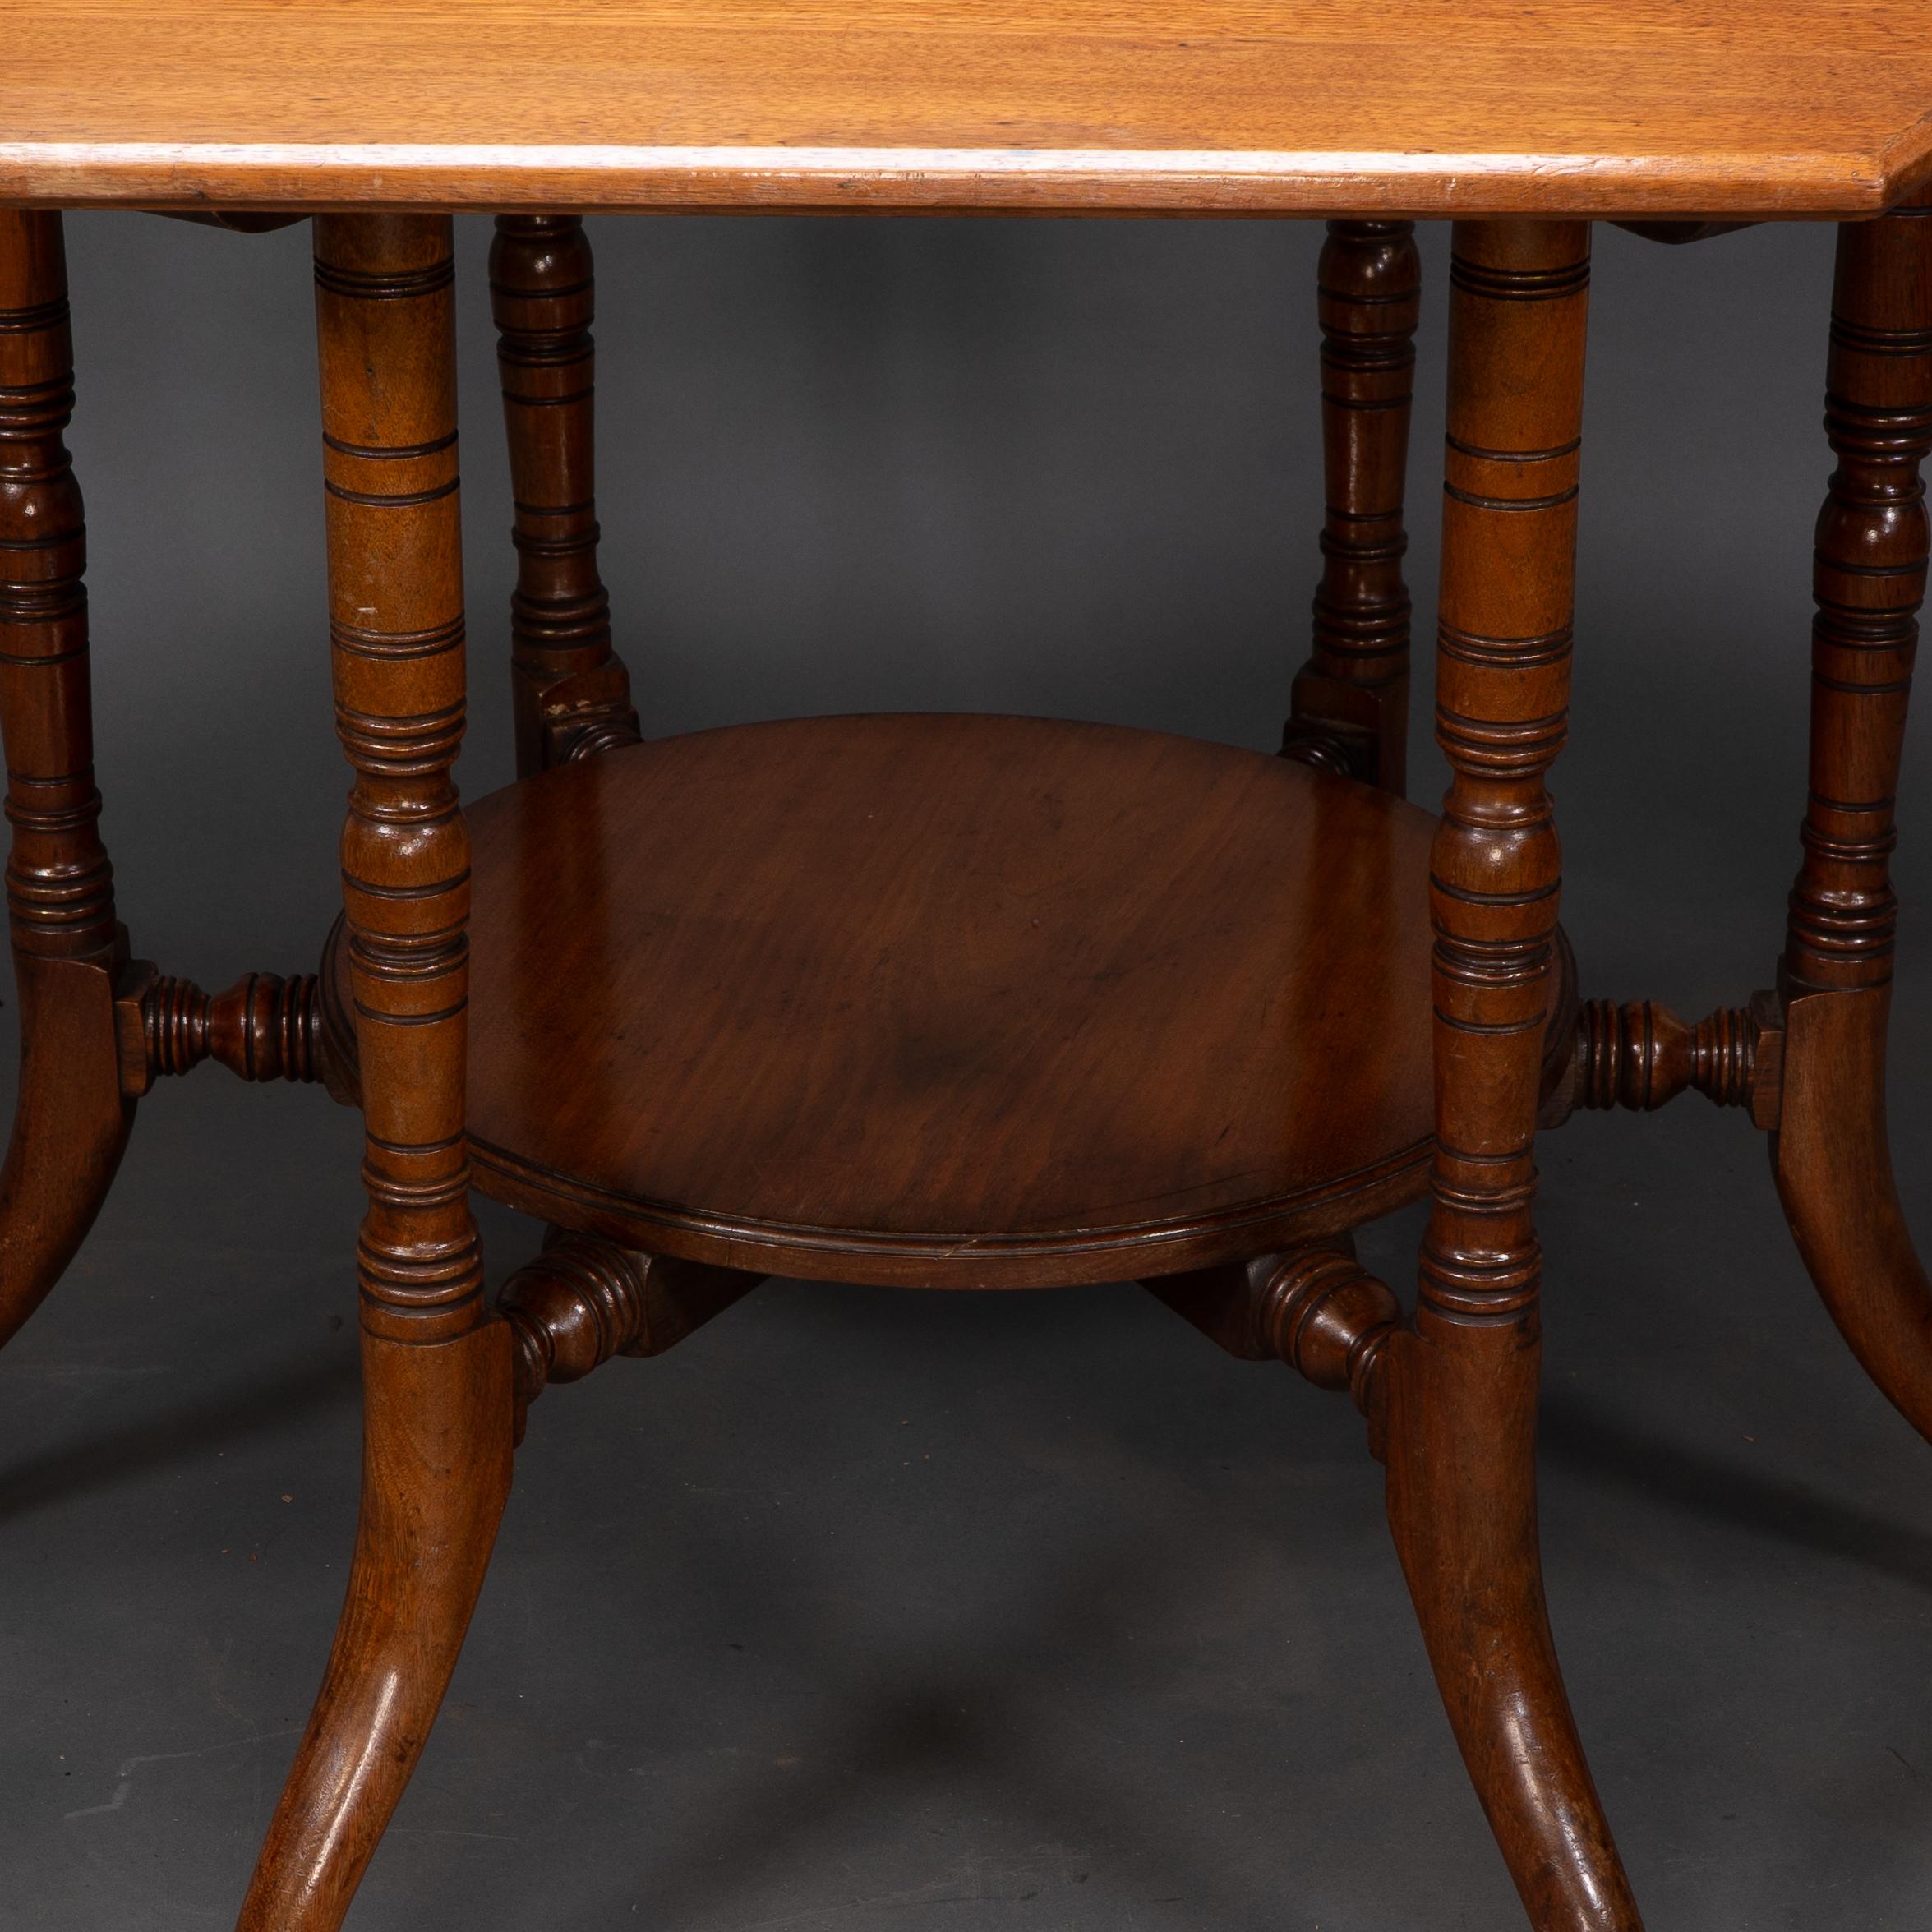 Collinson & Lock attributed. An Aesthetic Movement walnut octagonal center table For Sale 2